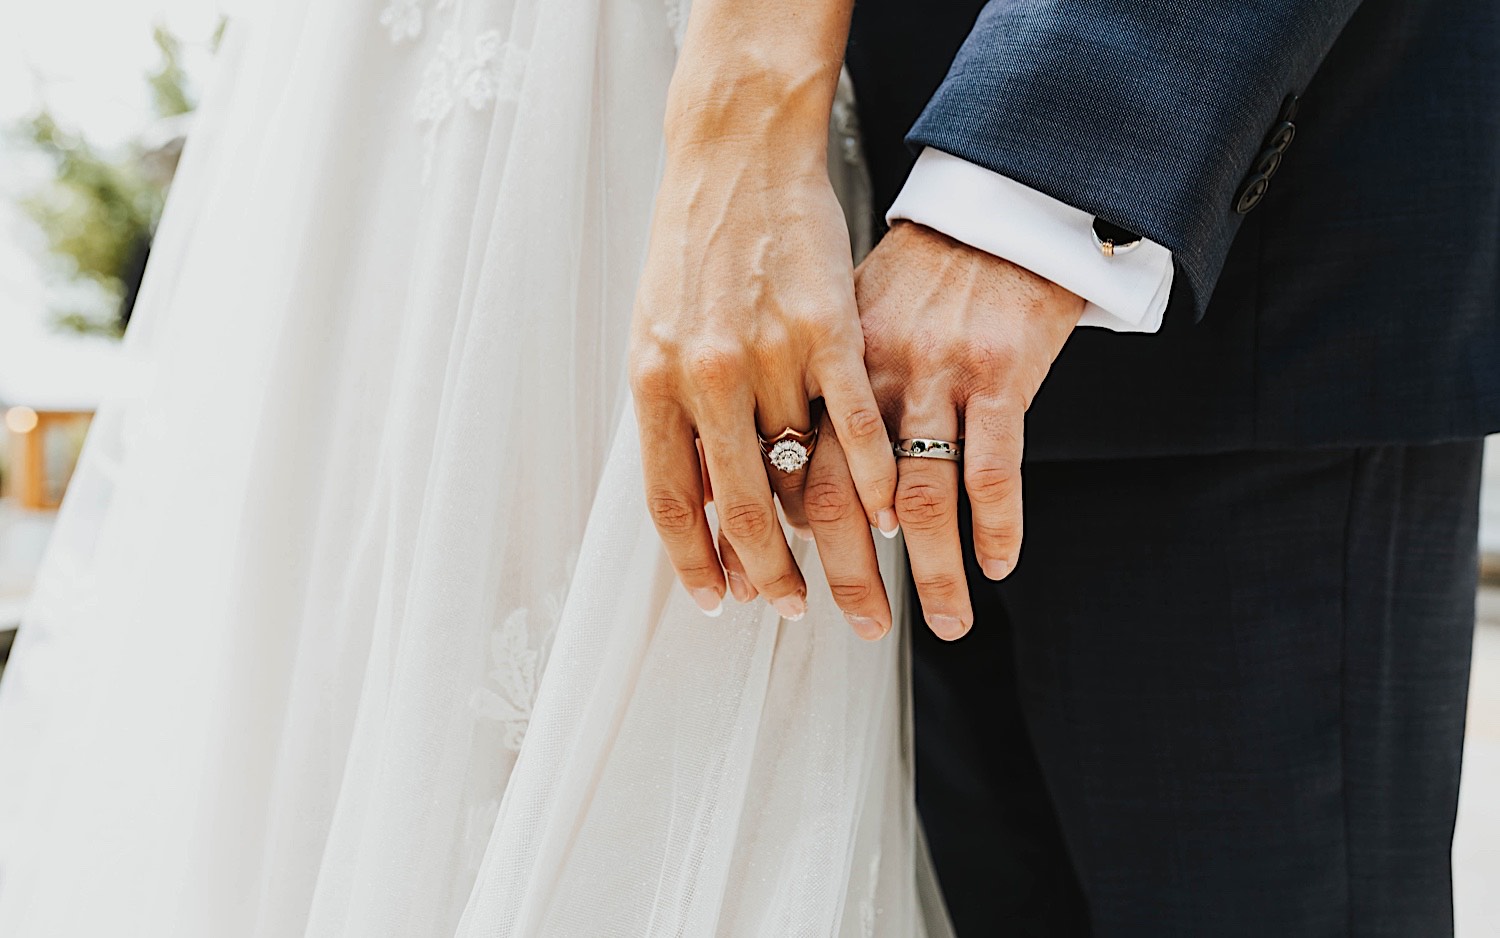 Close up photo of a bride and groom's hands holding one another, each with their wedding ring being shown off to the camera